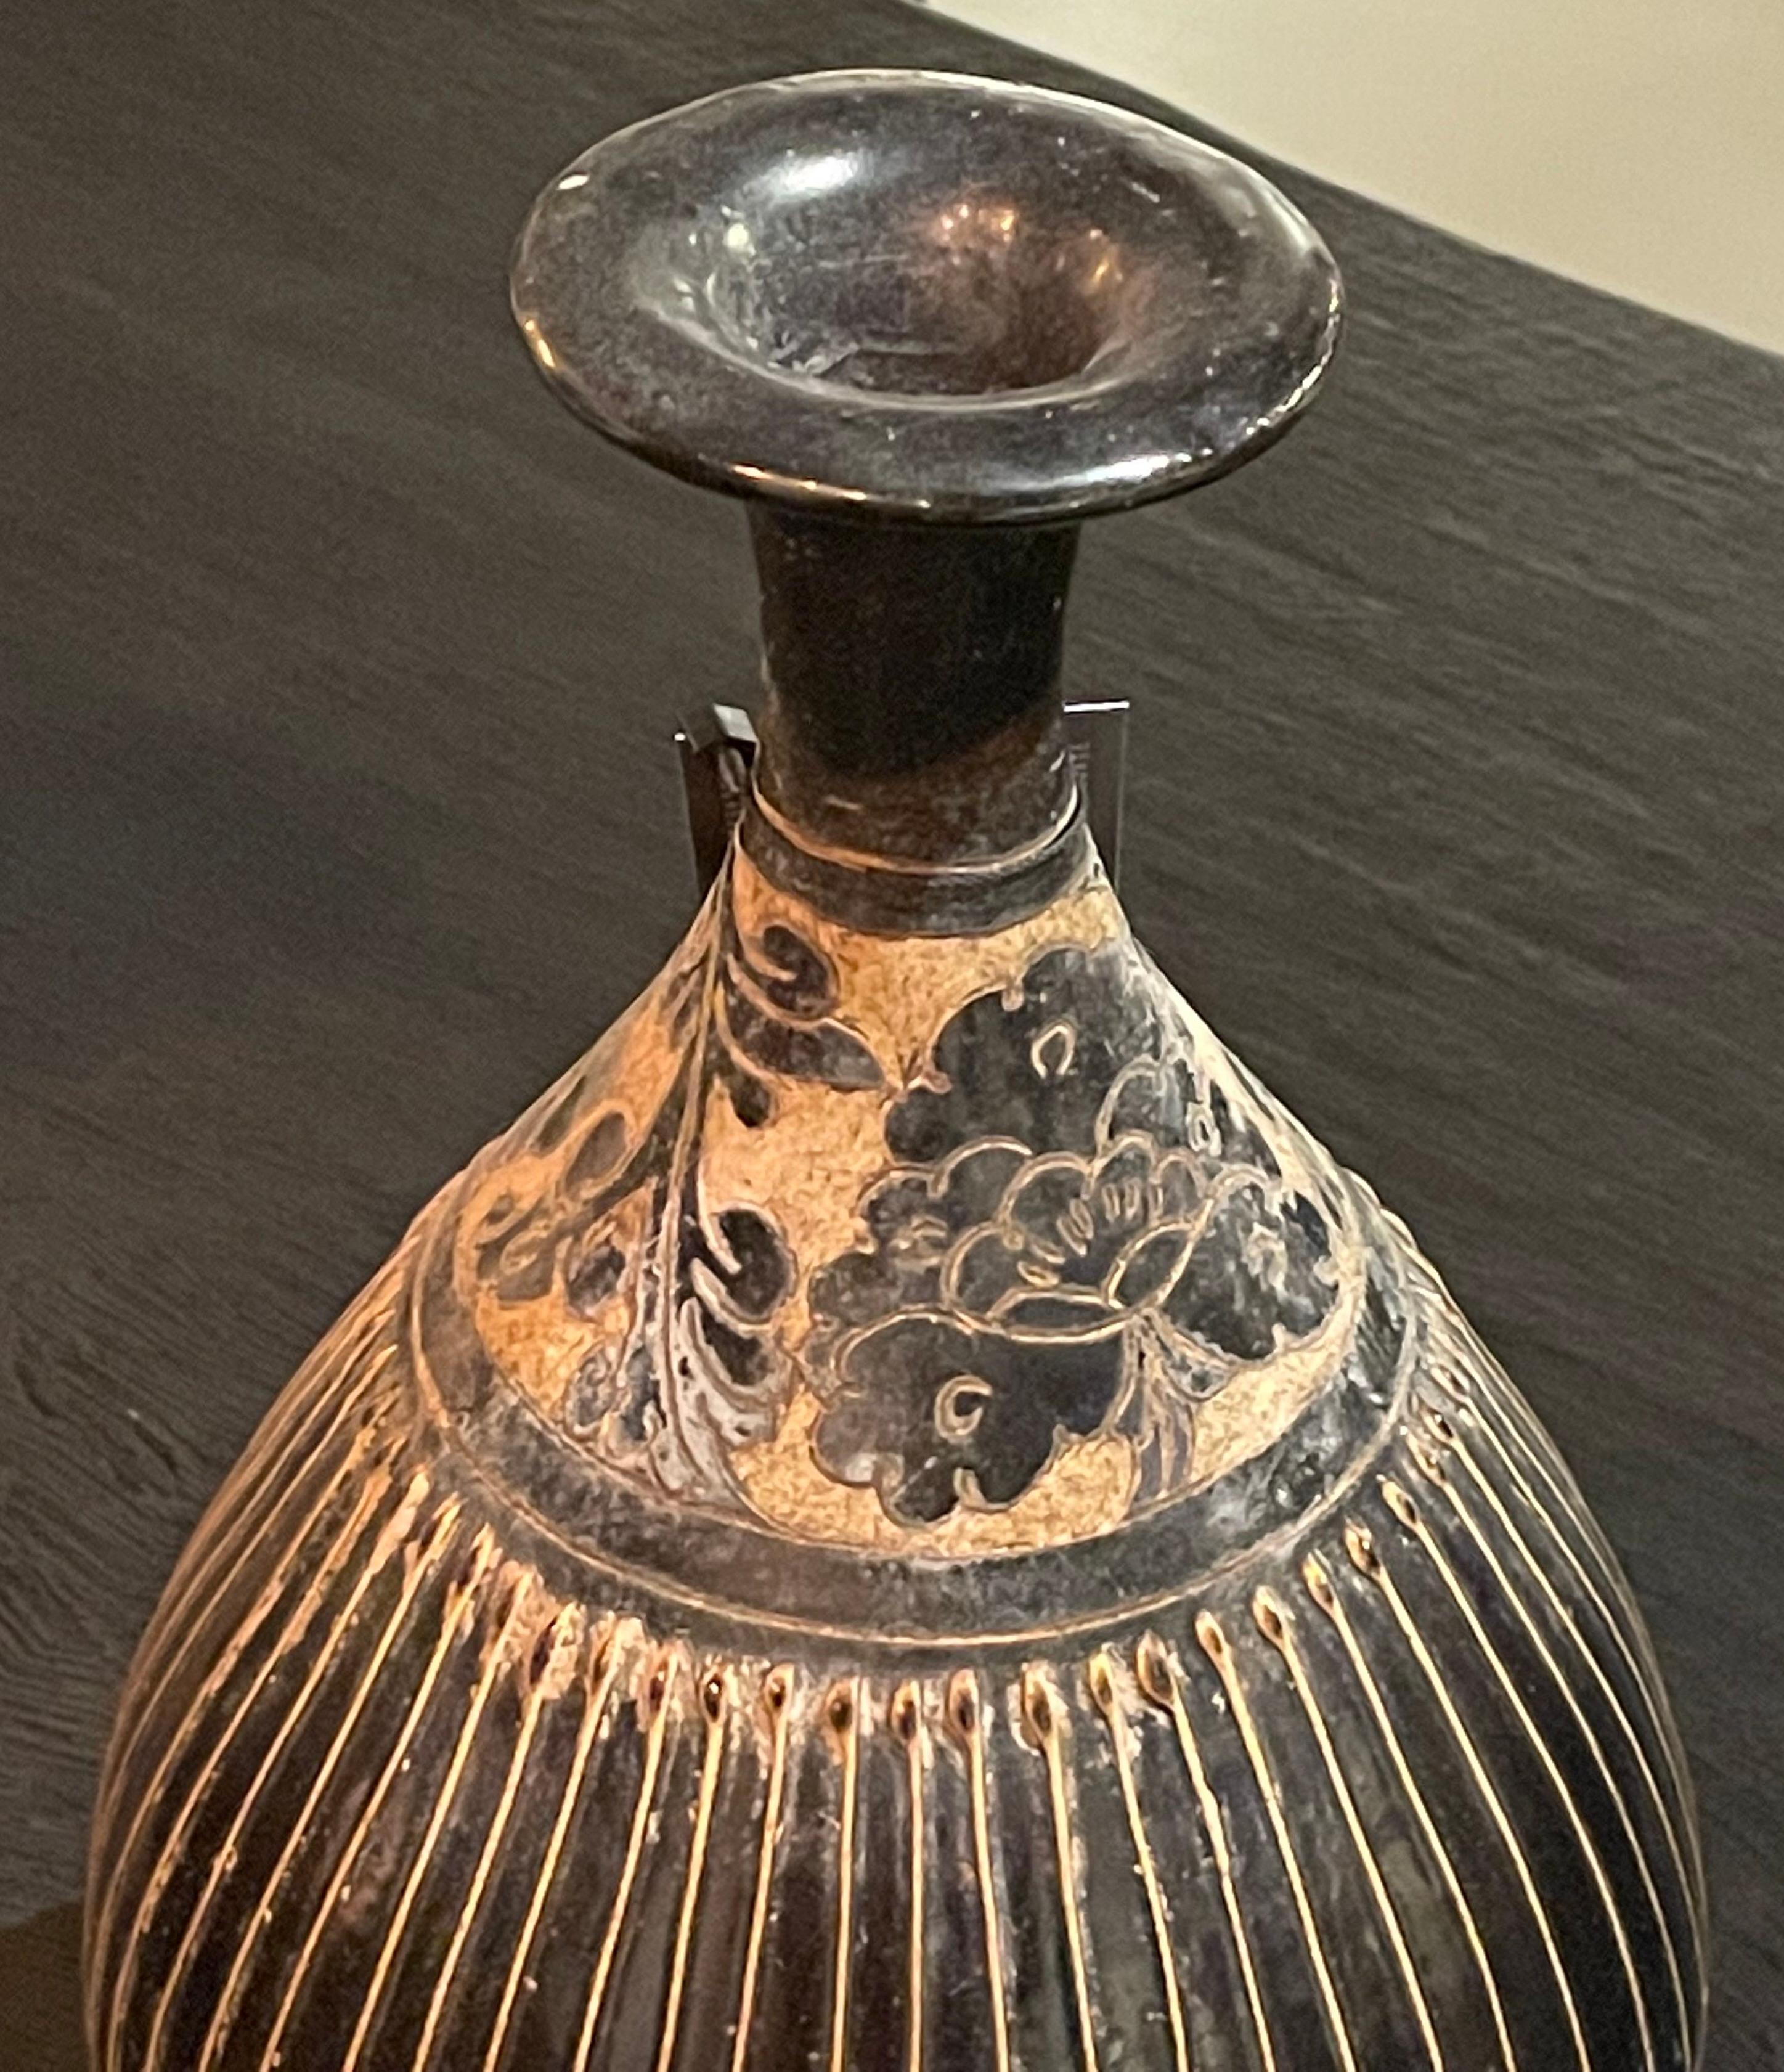 Contemporary Chinese black and gold stripe vase with 
decorative design on top of tulip shaped vase.
Two available and sold individually.
Arriving TBD.